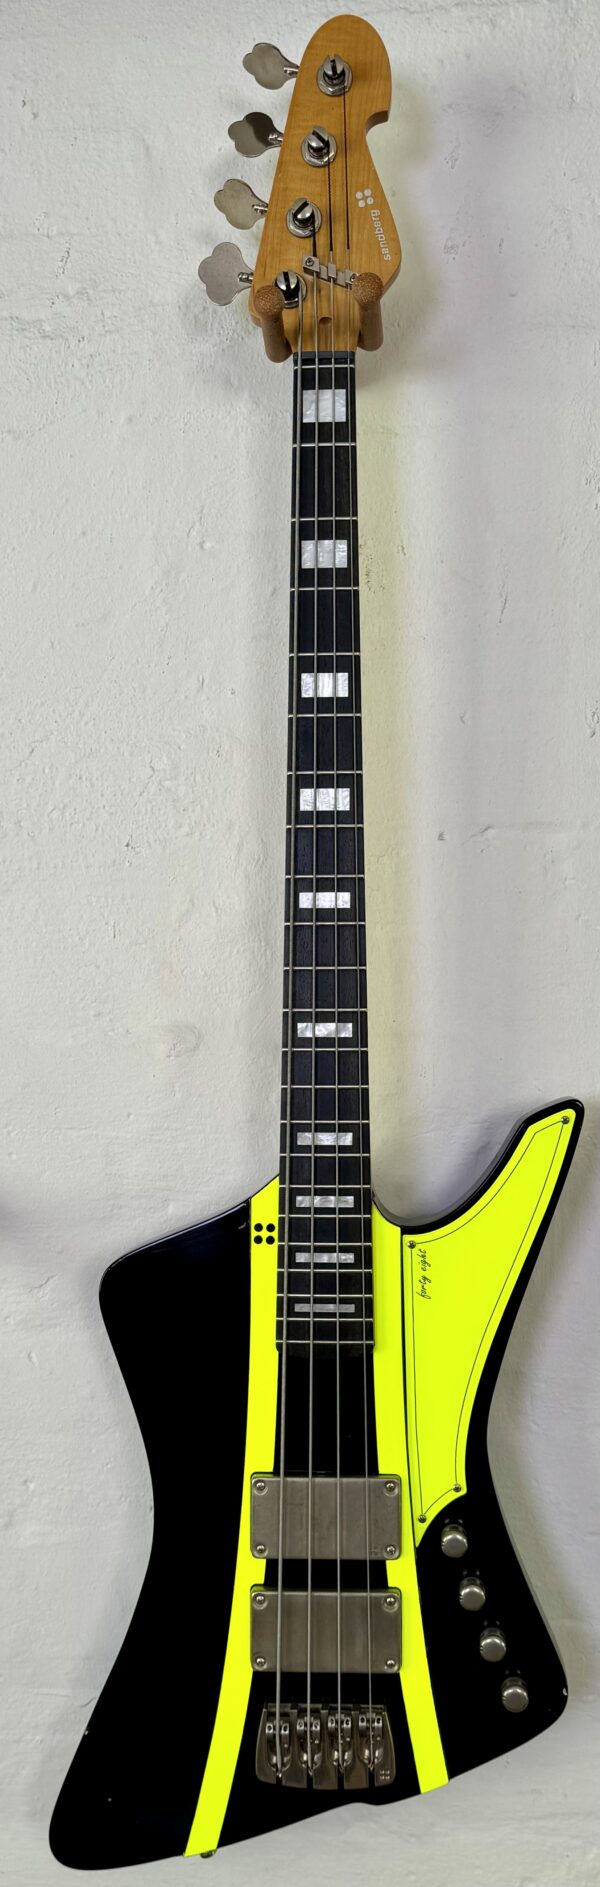 Sandberg Forty Eight 4 Soft Aged Black with Yellow Neon Stripes